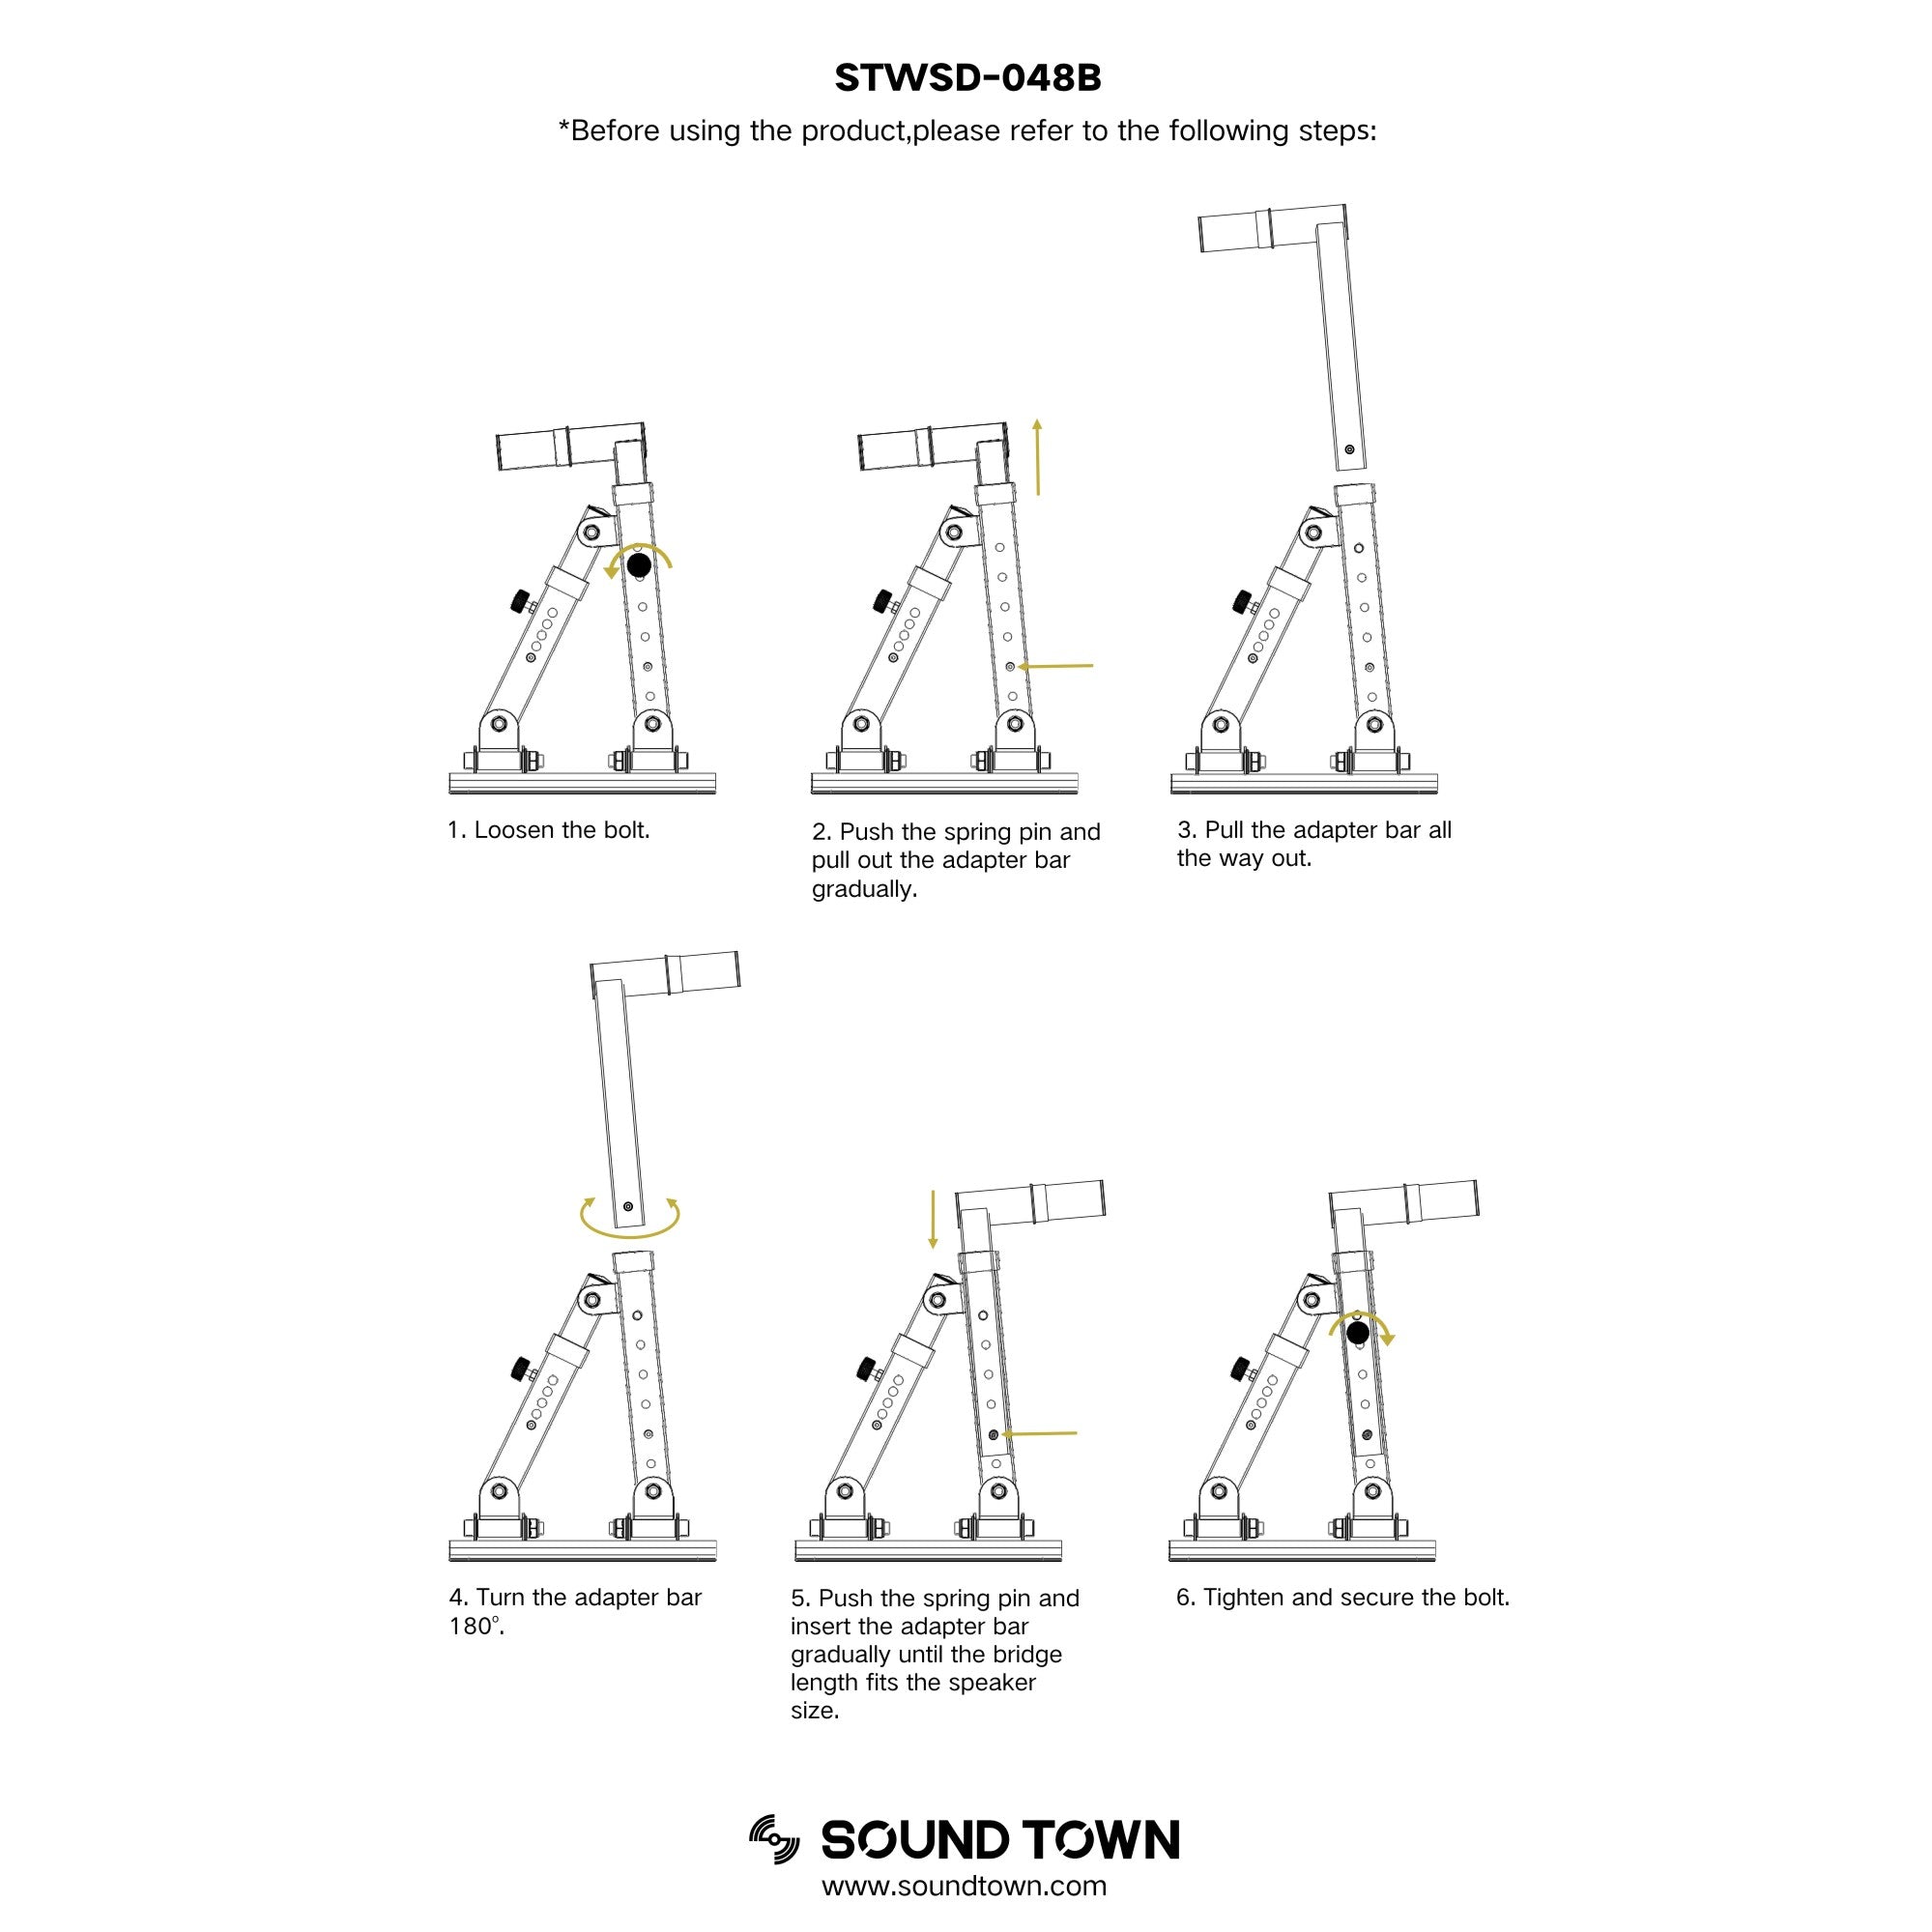 Sound Town STWSD-048B Pair of Adjustable Wall Mount Speaker Brackets with 180-degree Swivel - User Manual, How to Use, Connection Instructions